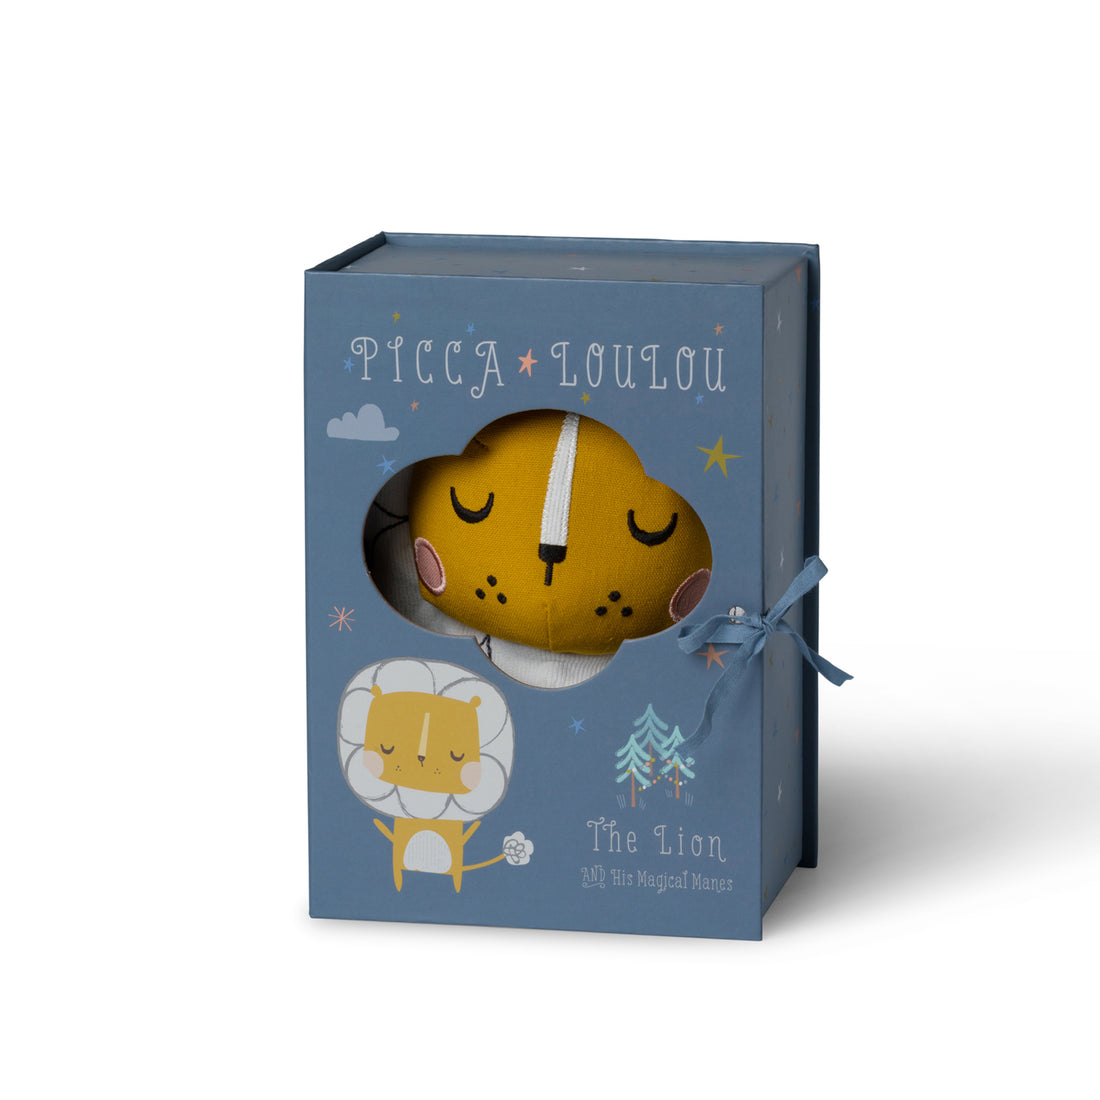 picca-loulou-lion-in-gift-box-18cm-picc-25215012- (5)